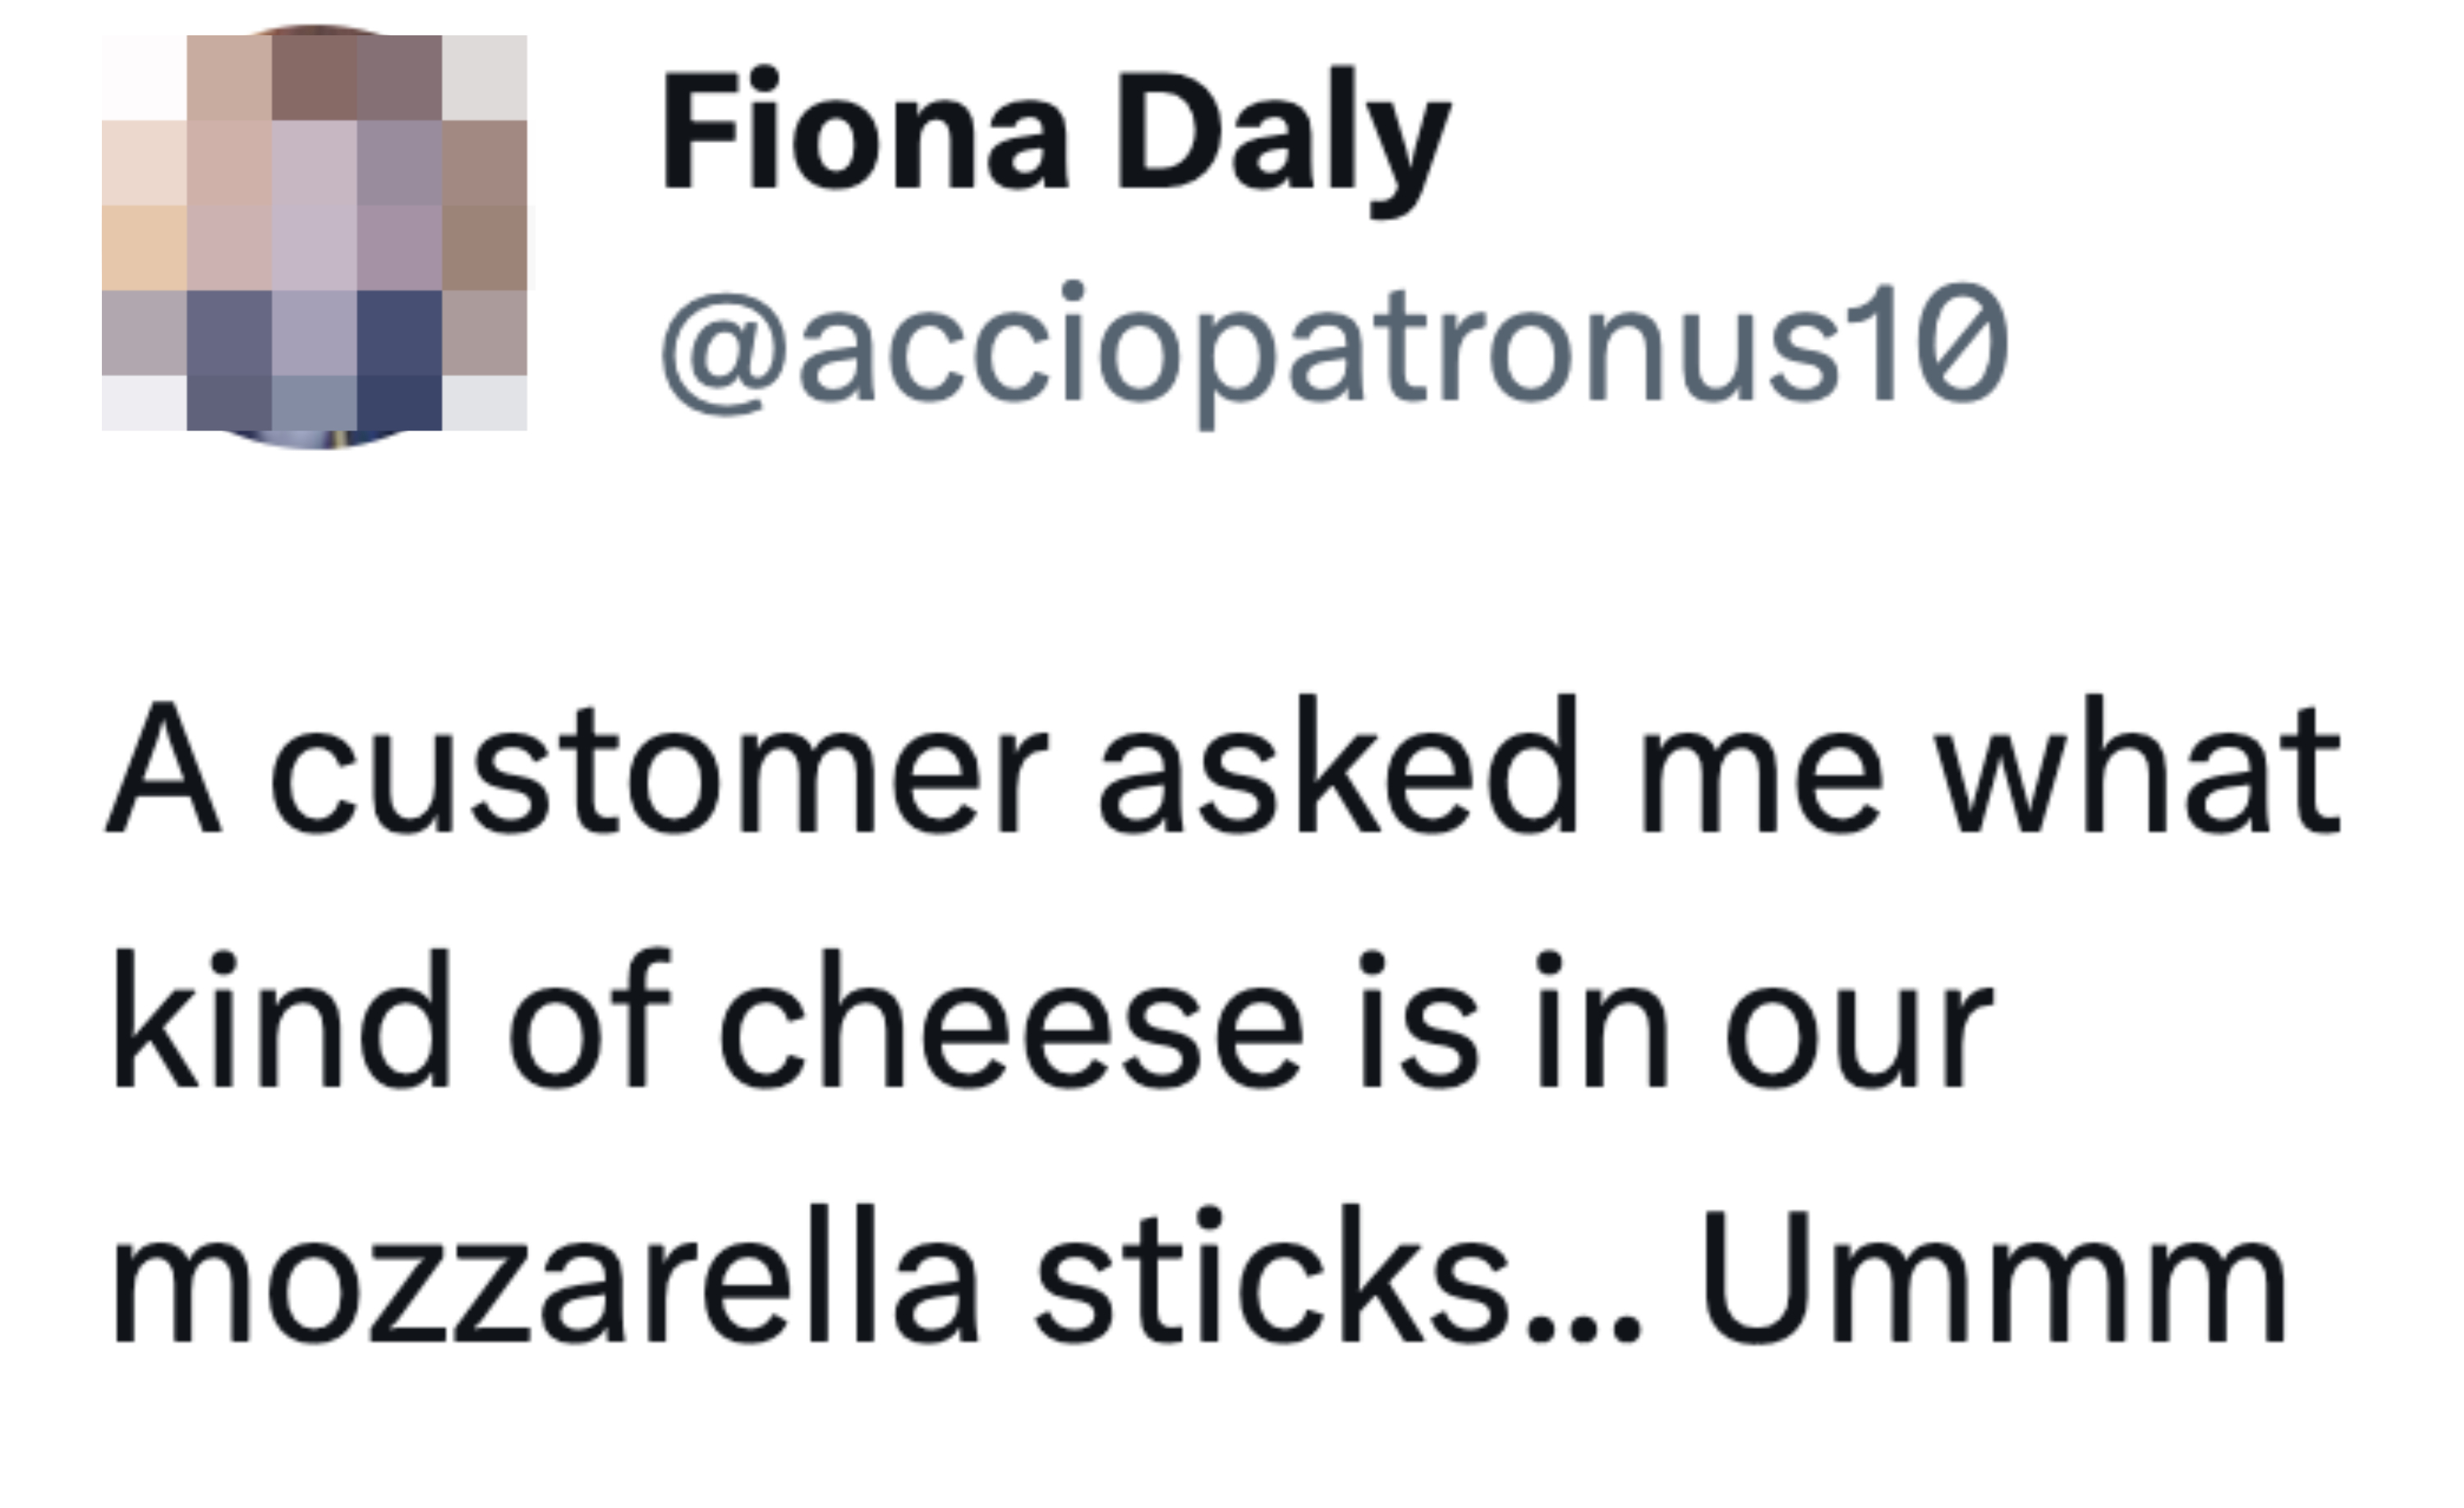 &quot;A customer asked me what kind of cheese is in our mozzarella sticks... Ummm&quot;